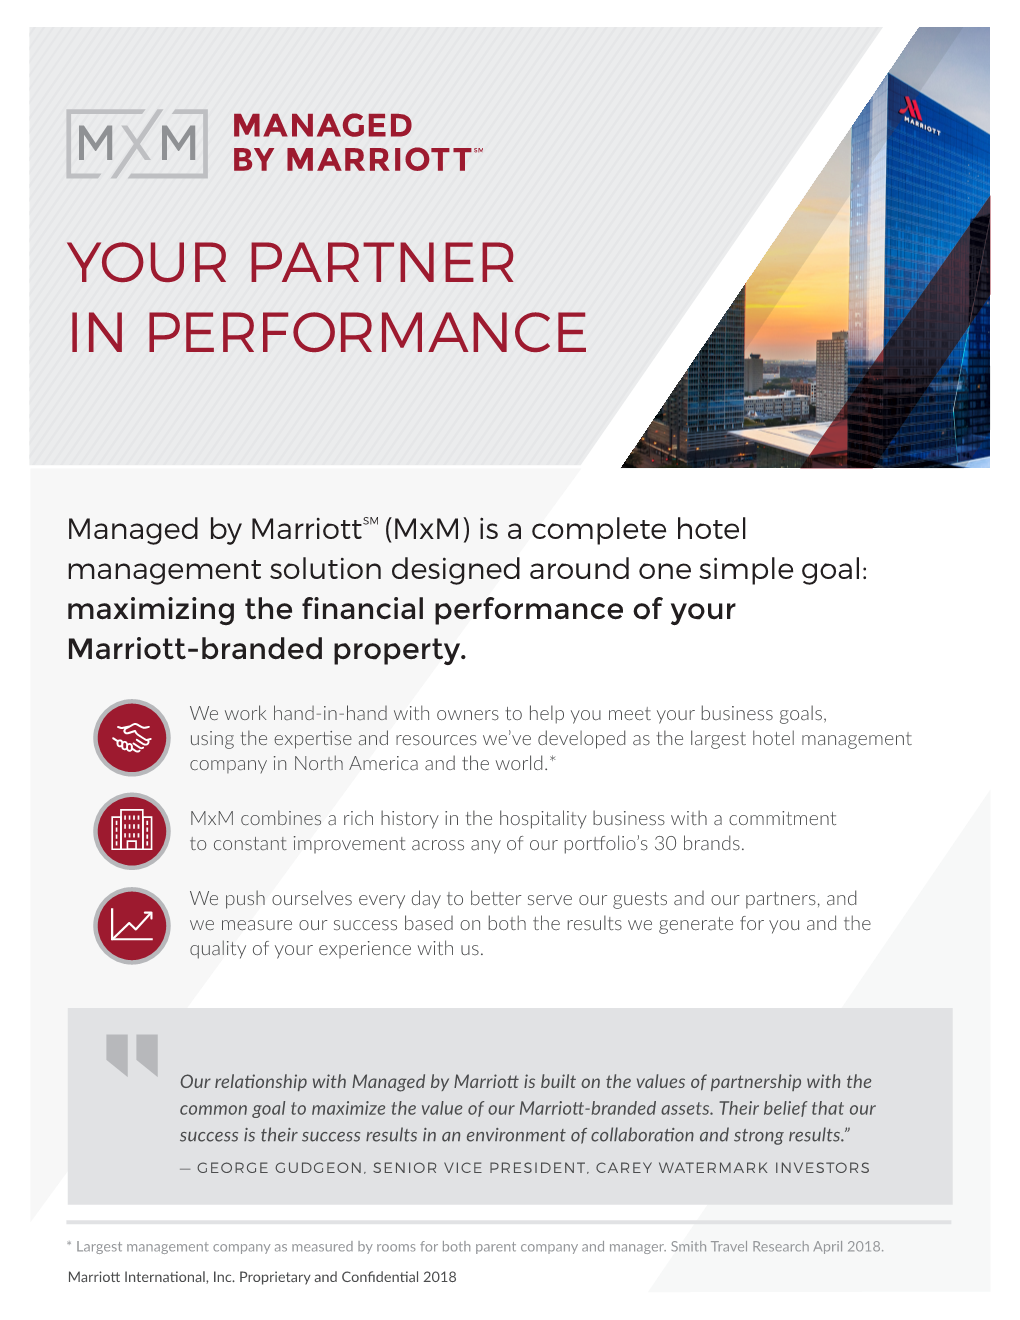 Your Partner in Performance